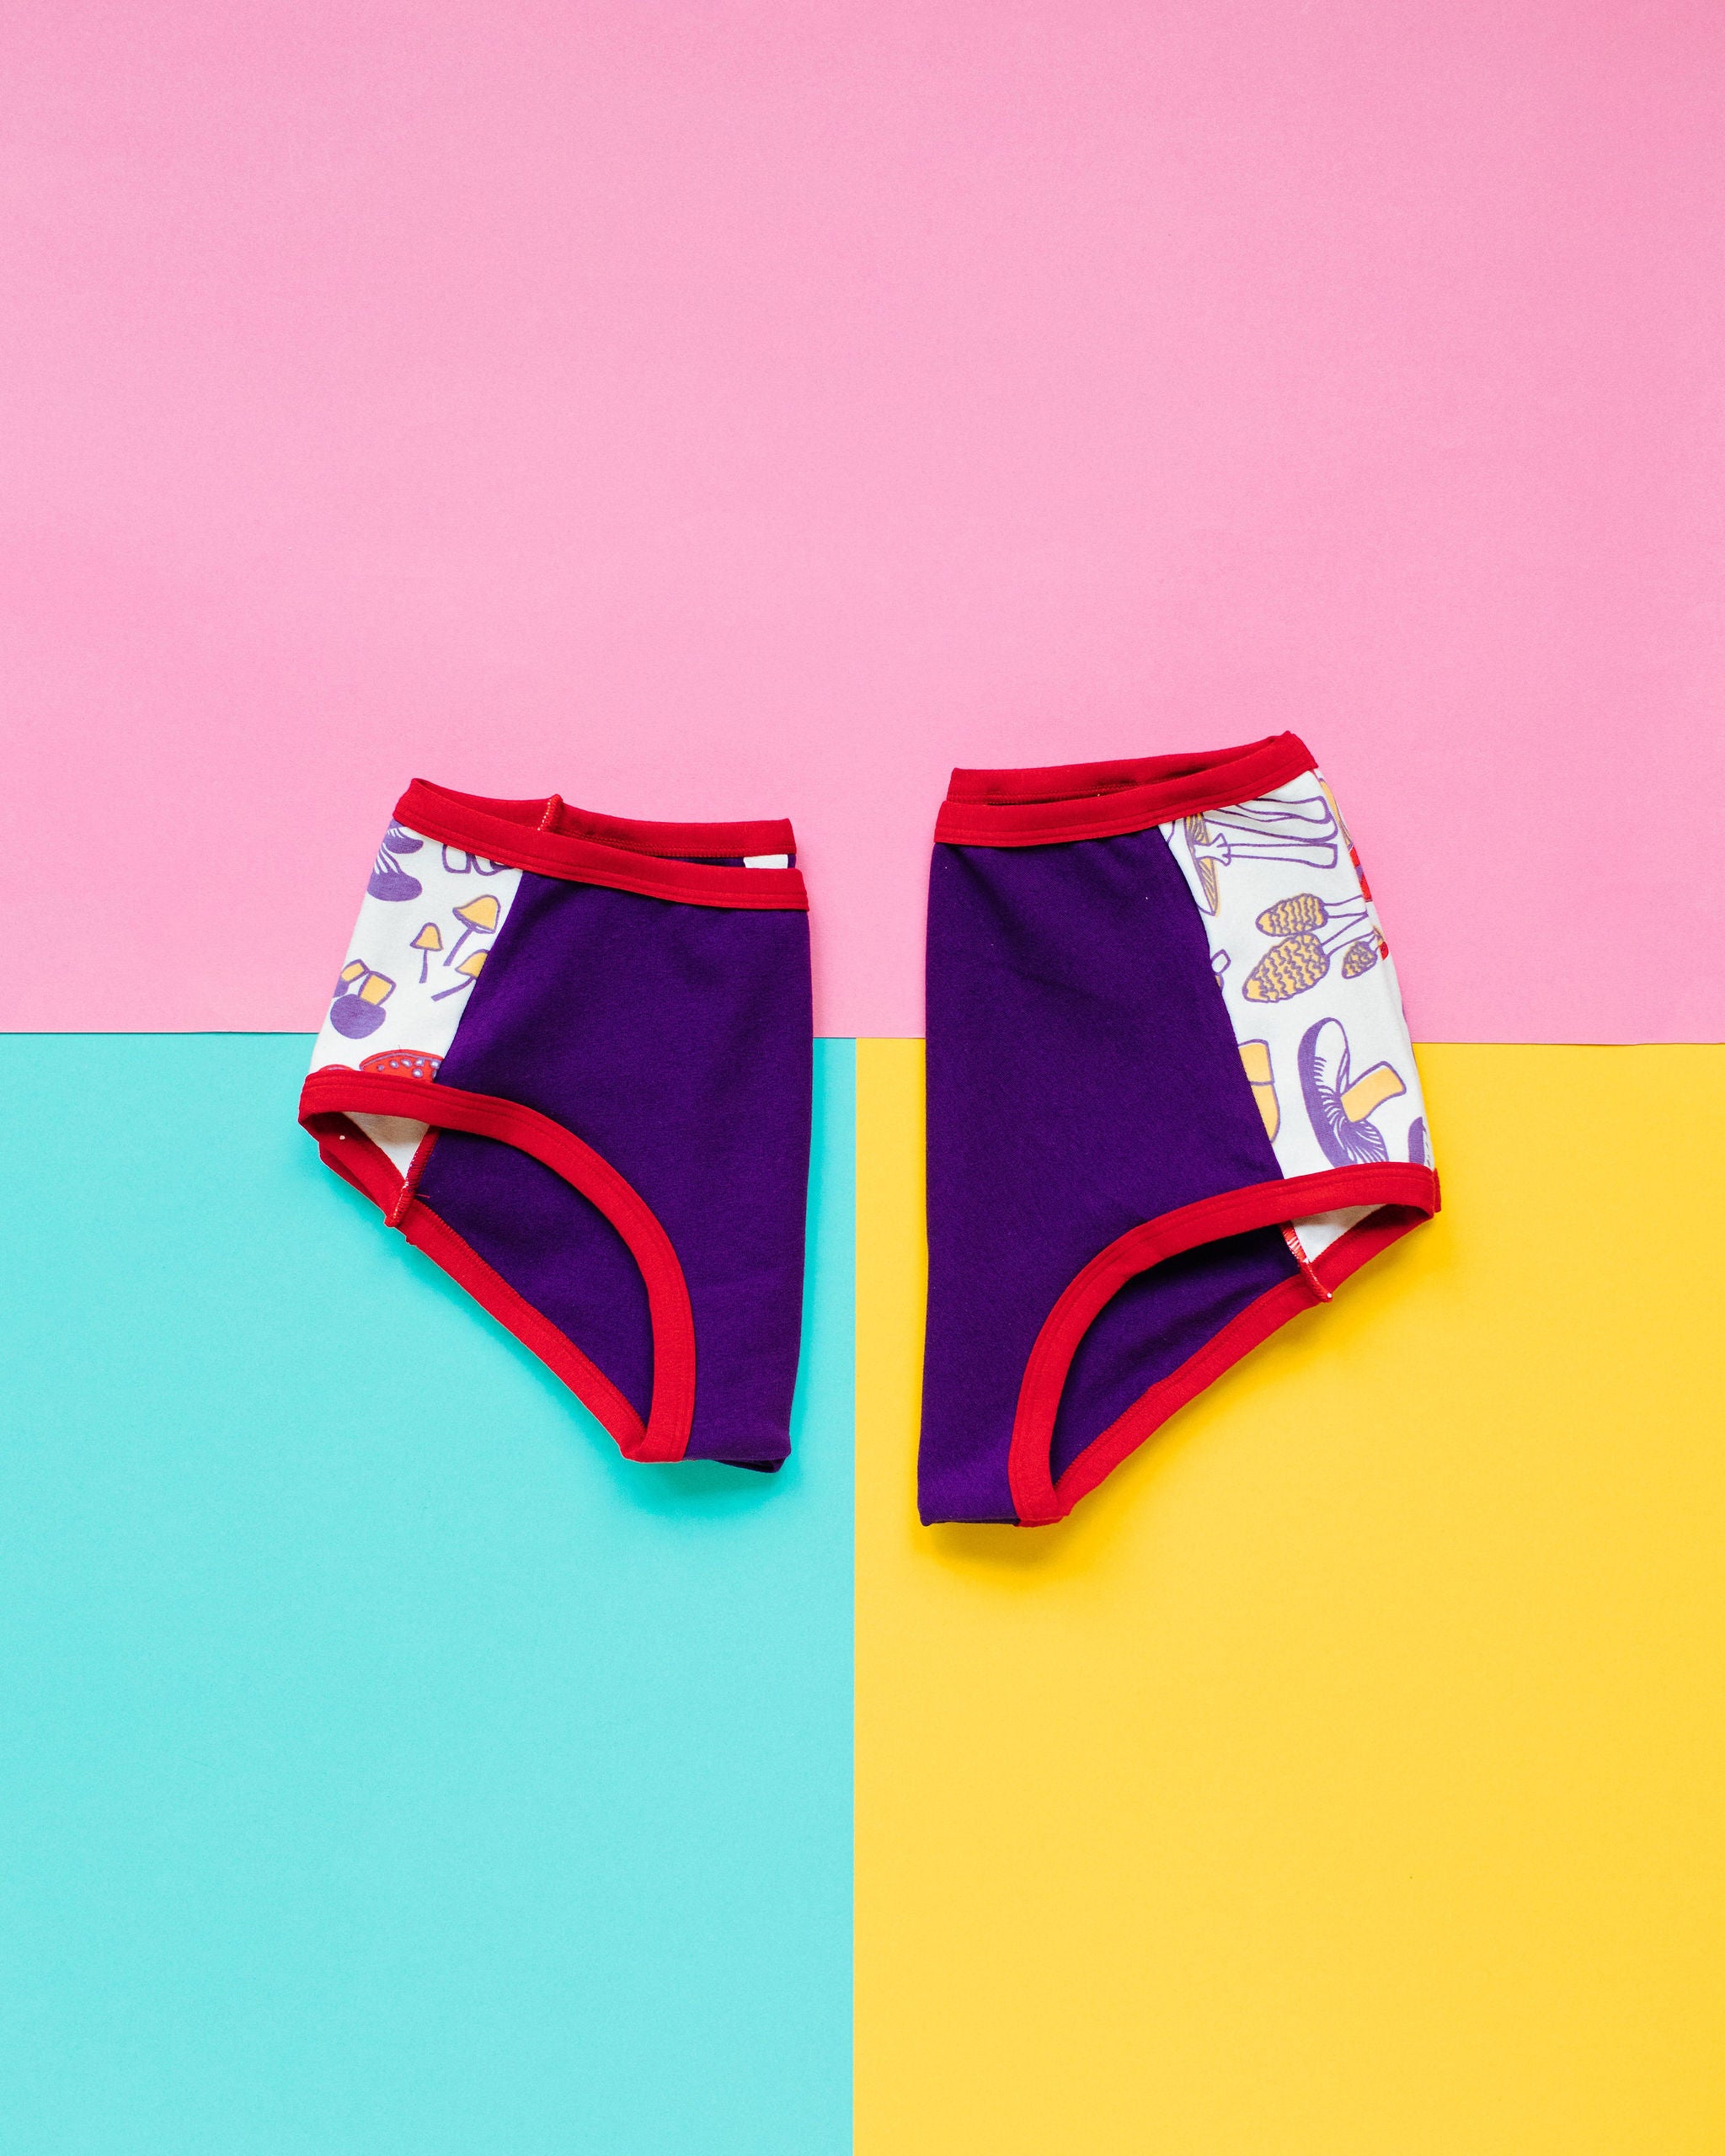 Flat lay of Thunderpants Hipster and Original Panel Pants style underwear in Mushroom Magic - mushroom sides, purple middle, and red binding.